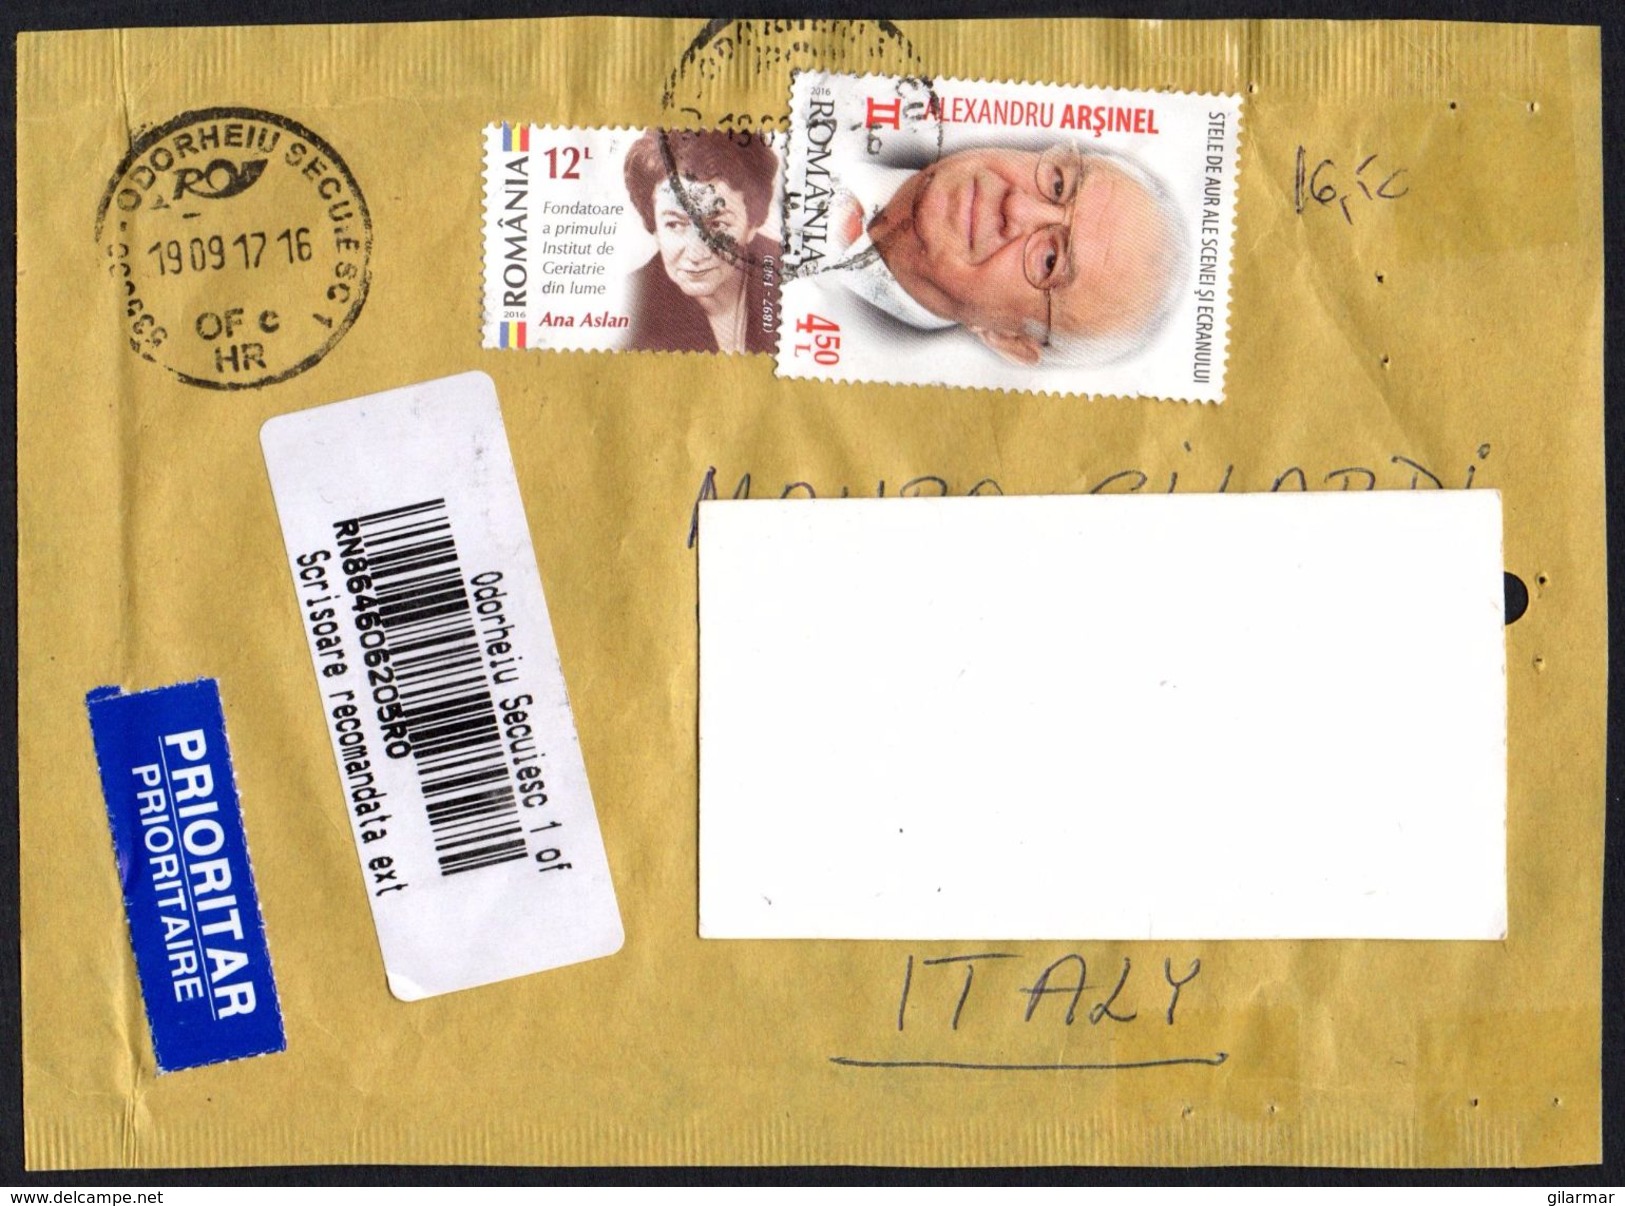 ROMANIA 2017 - REGISTERED ENVELOPE - FRONT COVER - MOVIE: ALEXANDRU ARSINEL / PHYSICIANS: ANA ASLAN - Lettres & Documents